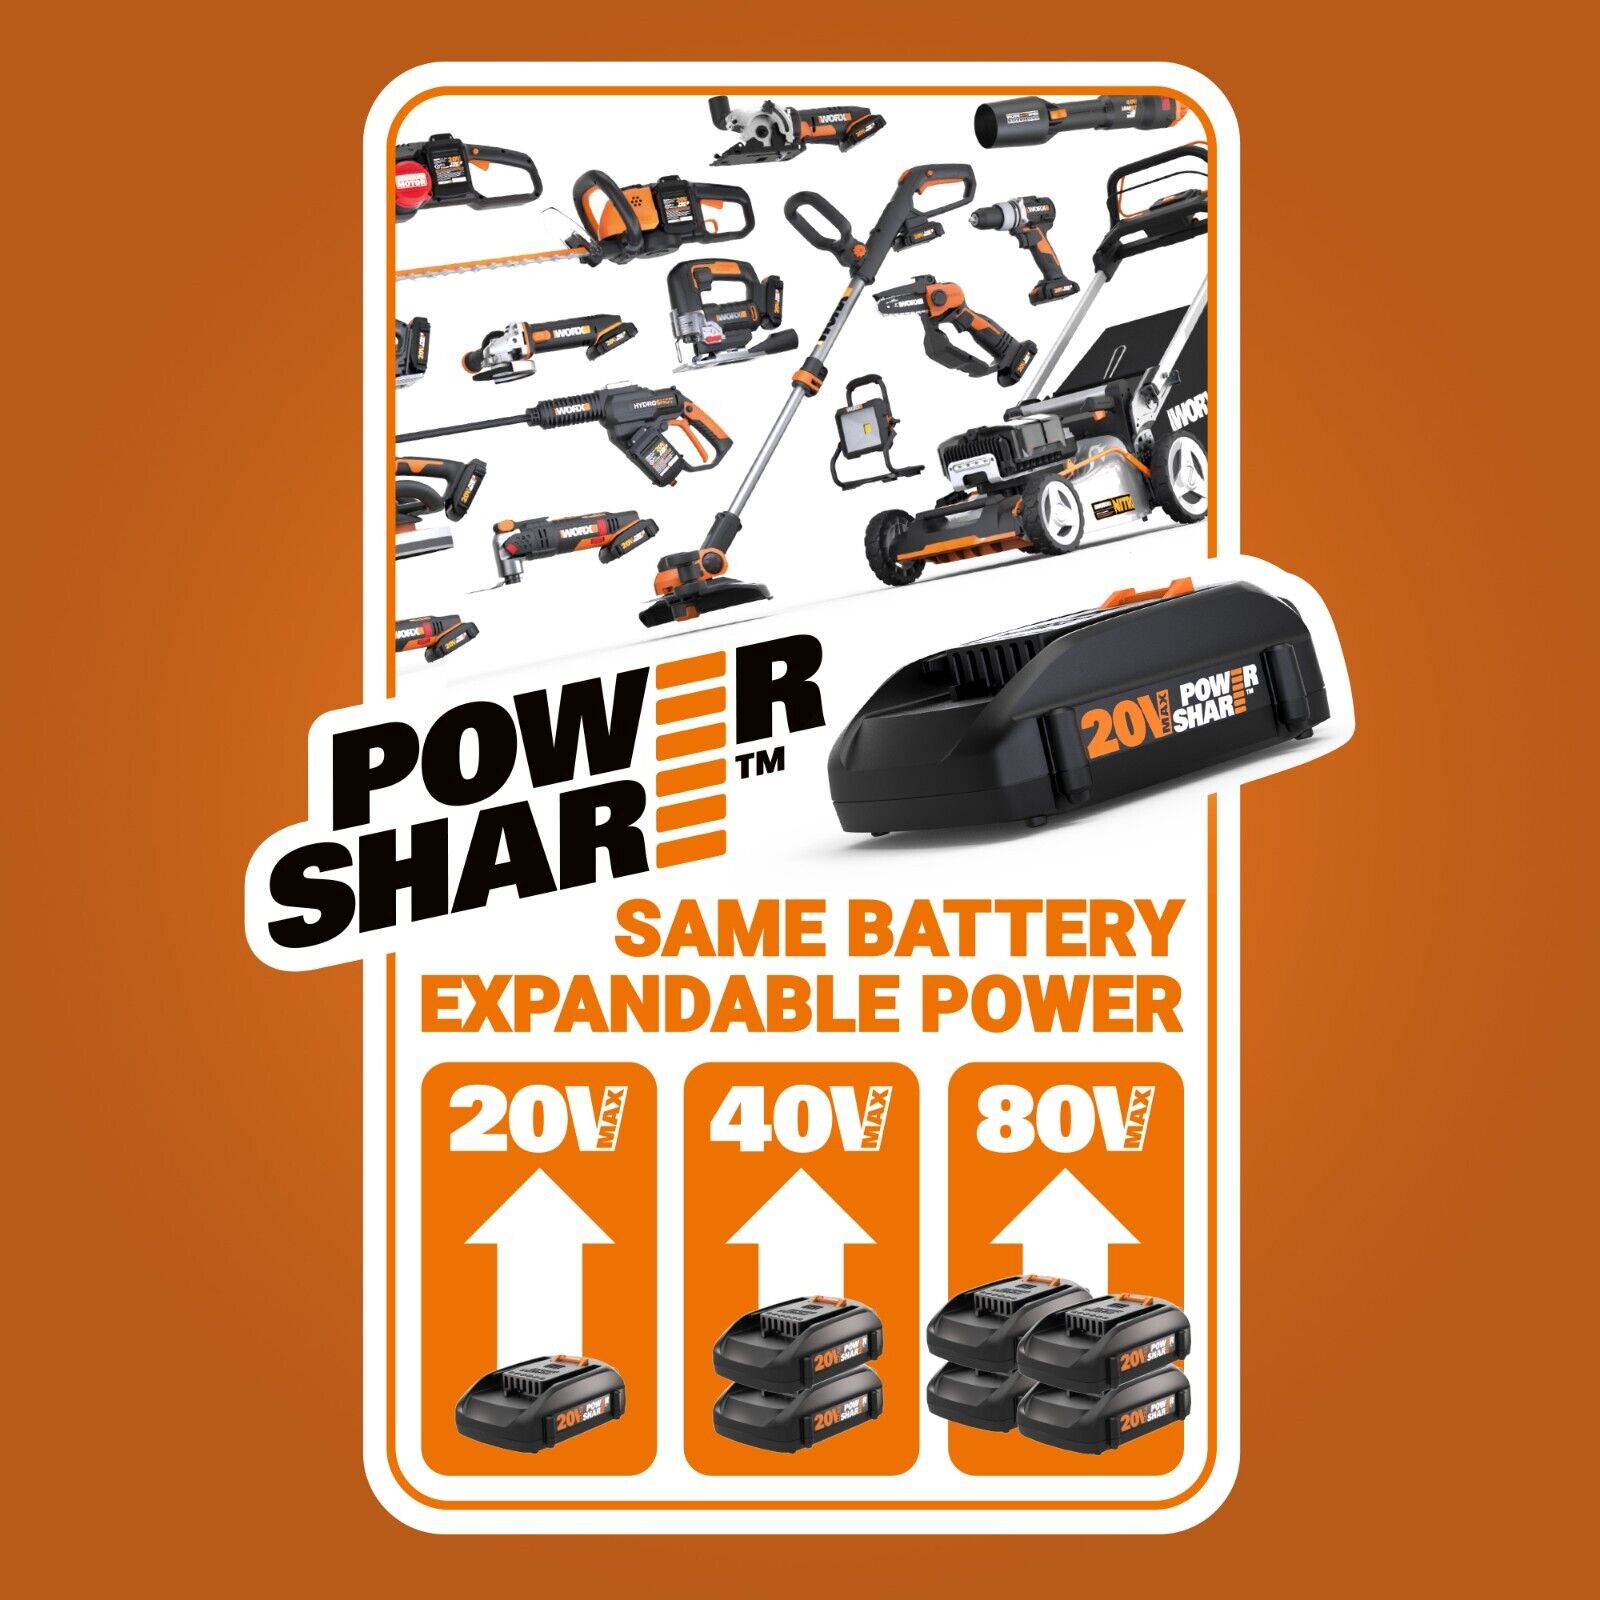 Worx WX820L.9 20V Power Share Sandeck 5-in-1 Cordless Multi-Sander (Tool Only) - image 2 of 6